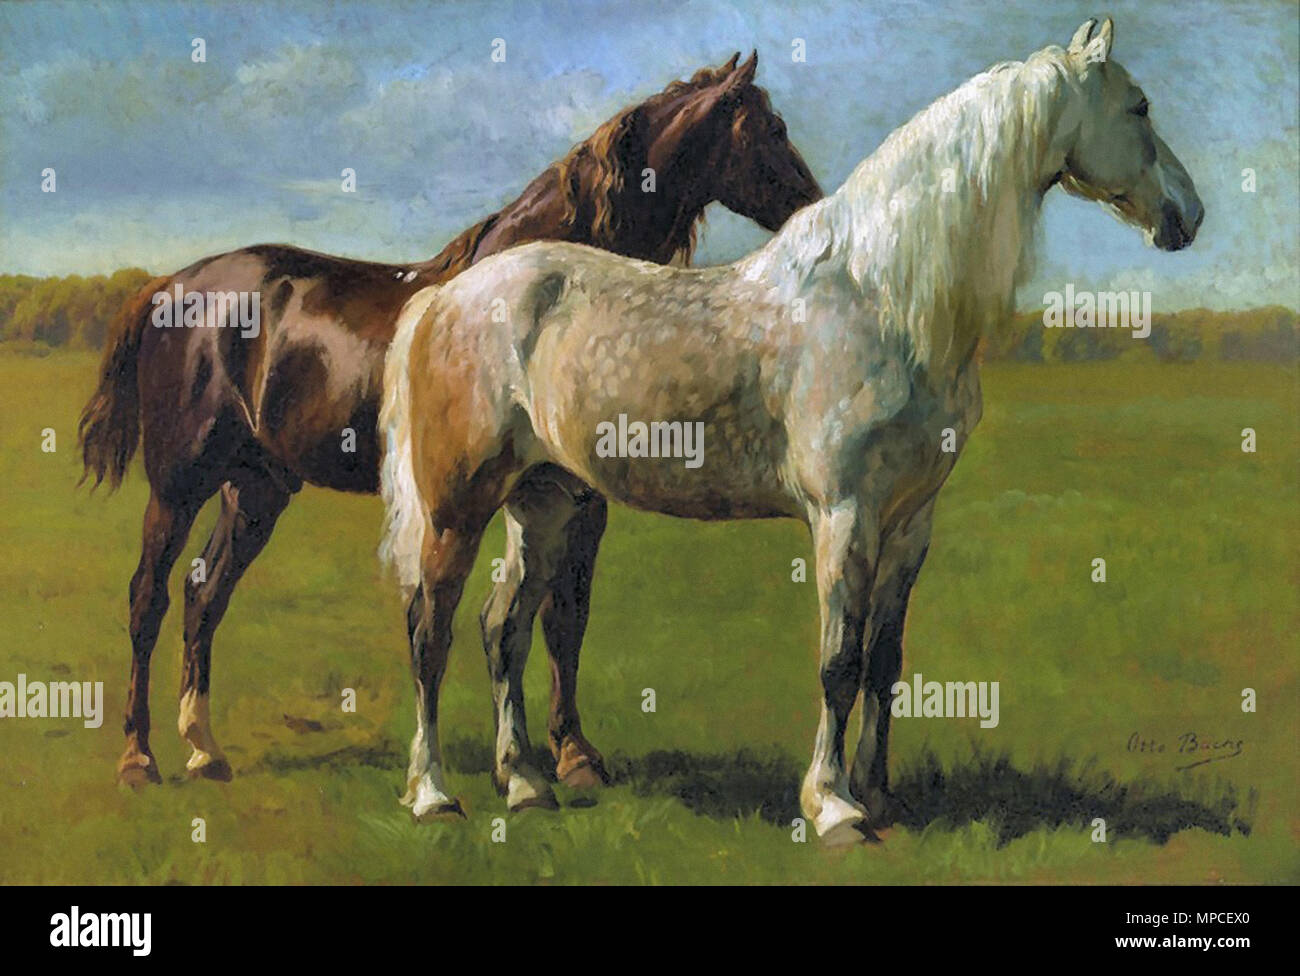 Bache Otto - Two Horses on a Field Stock Photo - Alamy